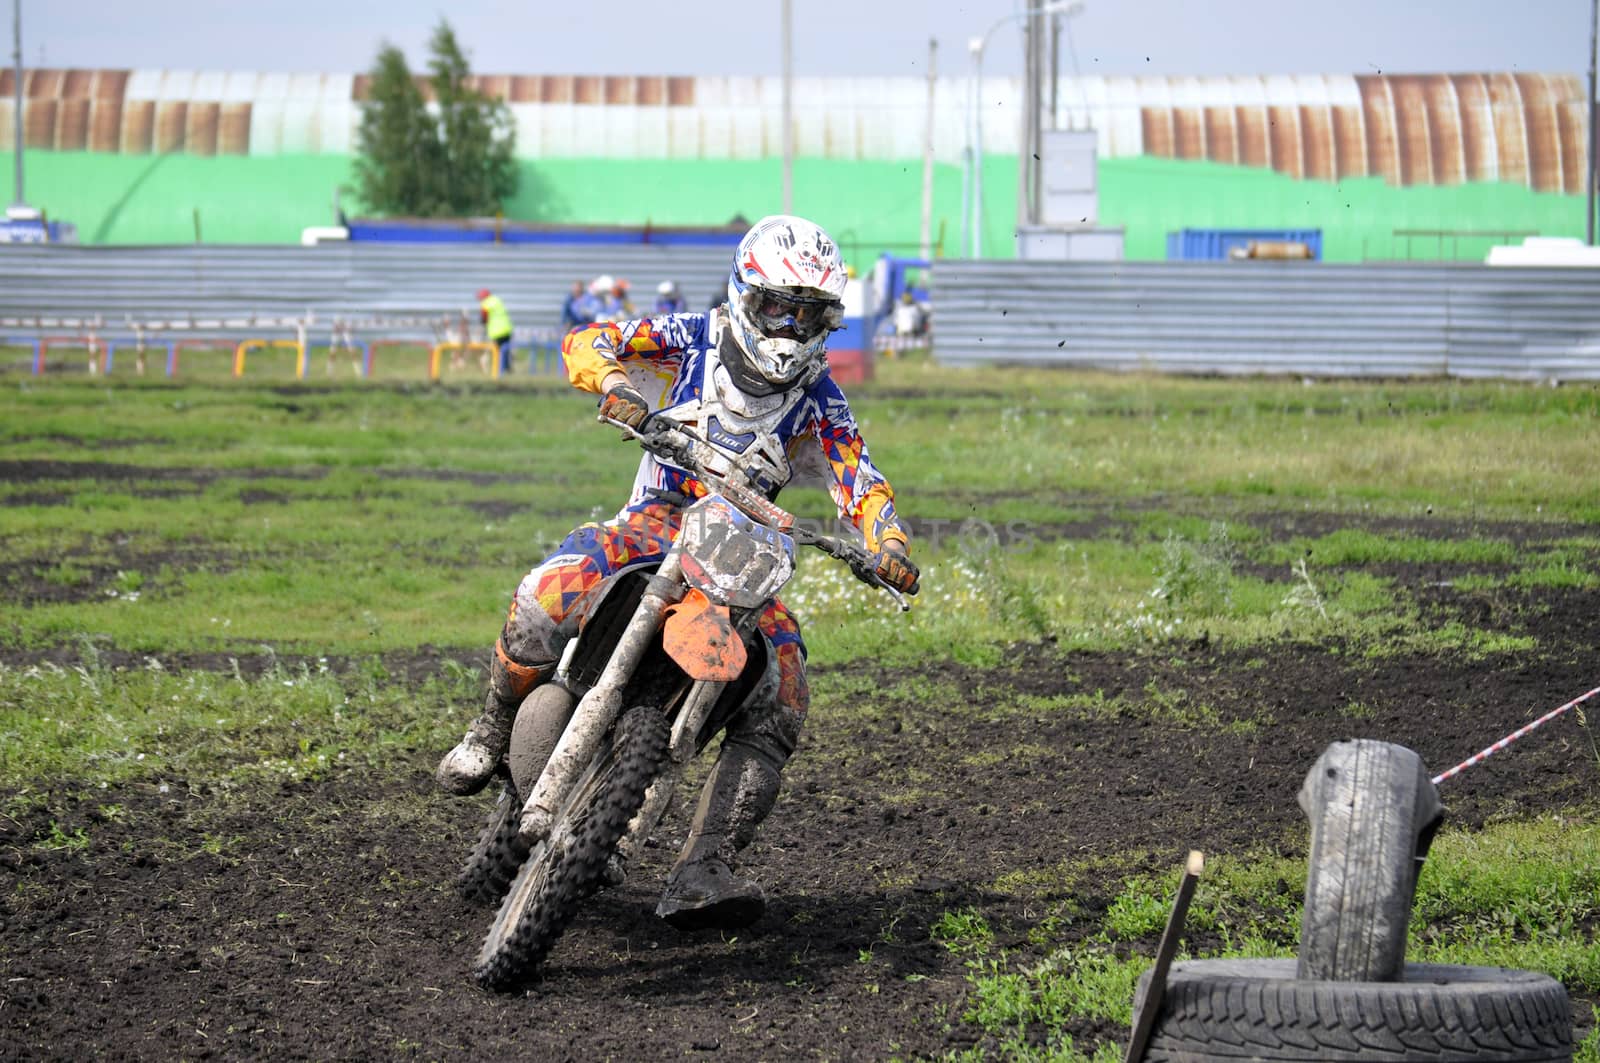 Motorcyclists on motorcycles participate in cross-country race